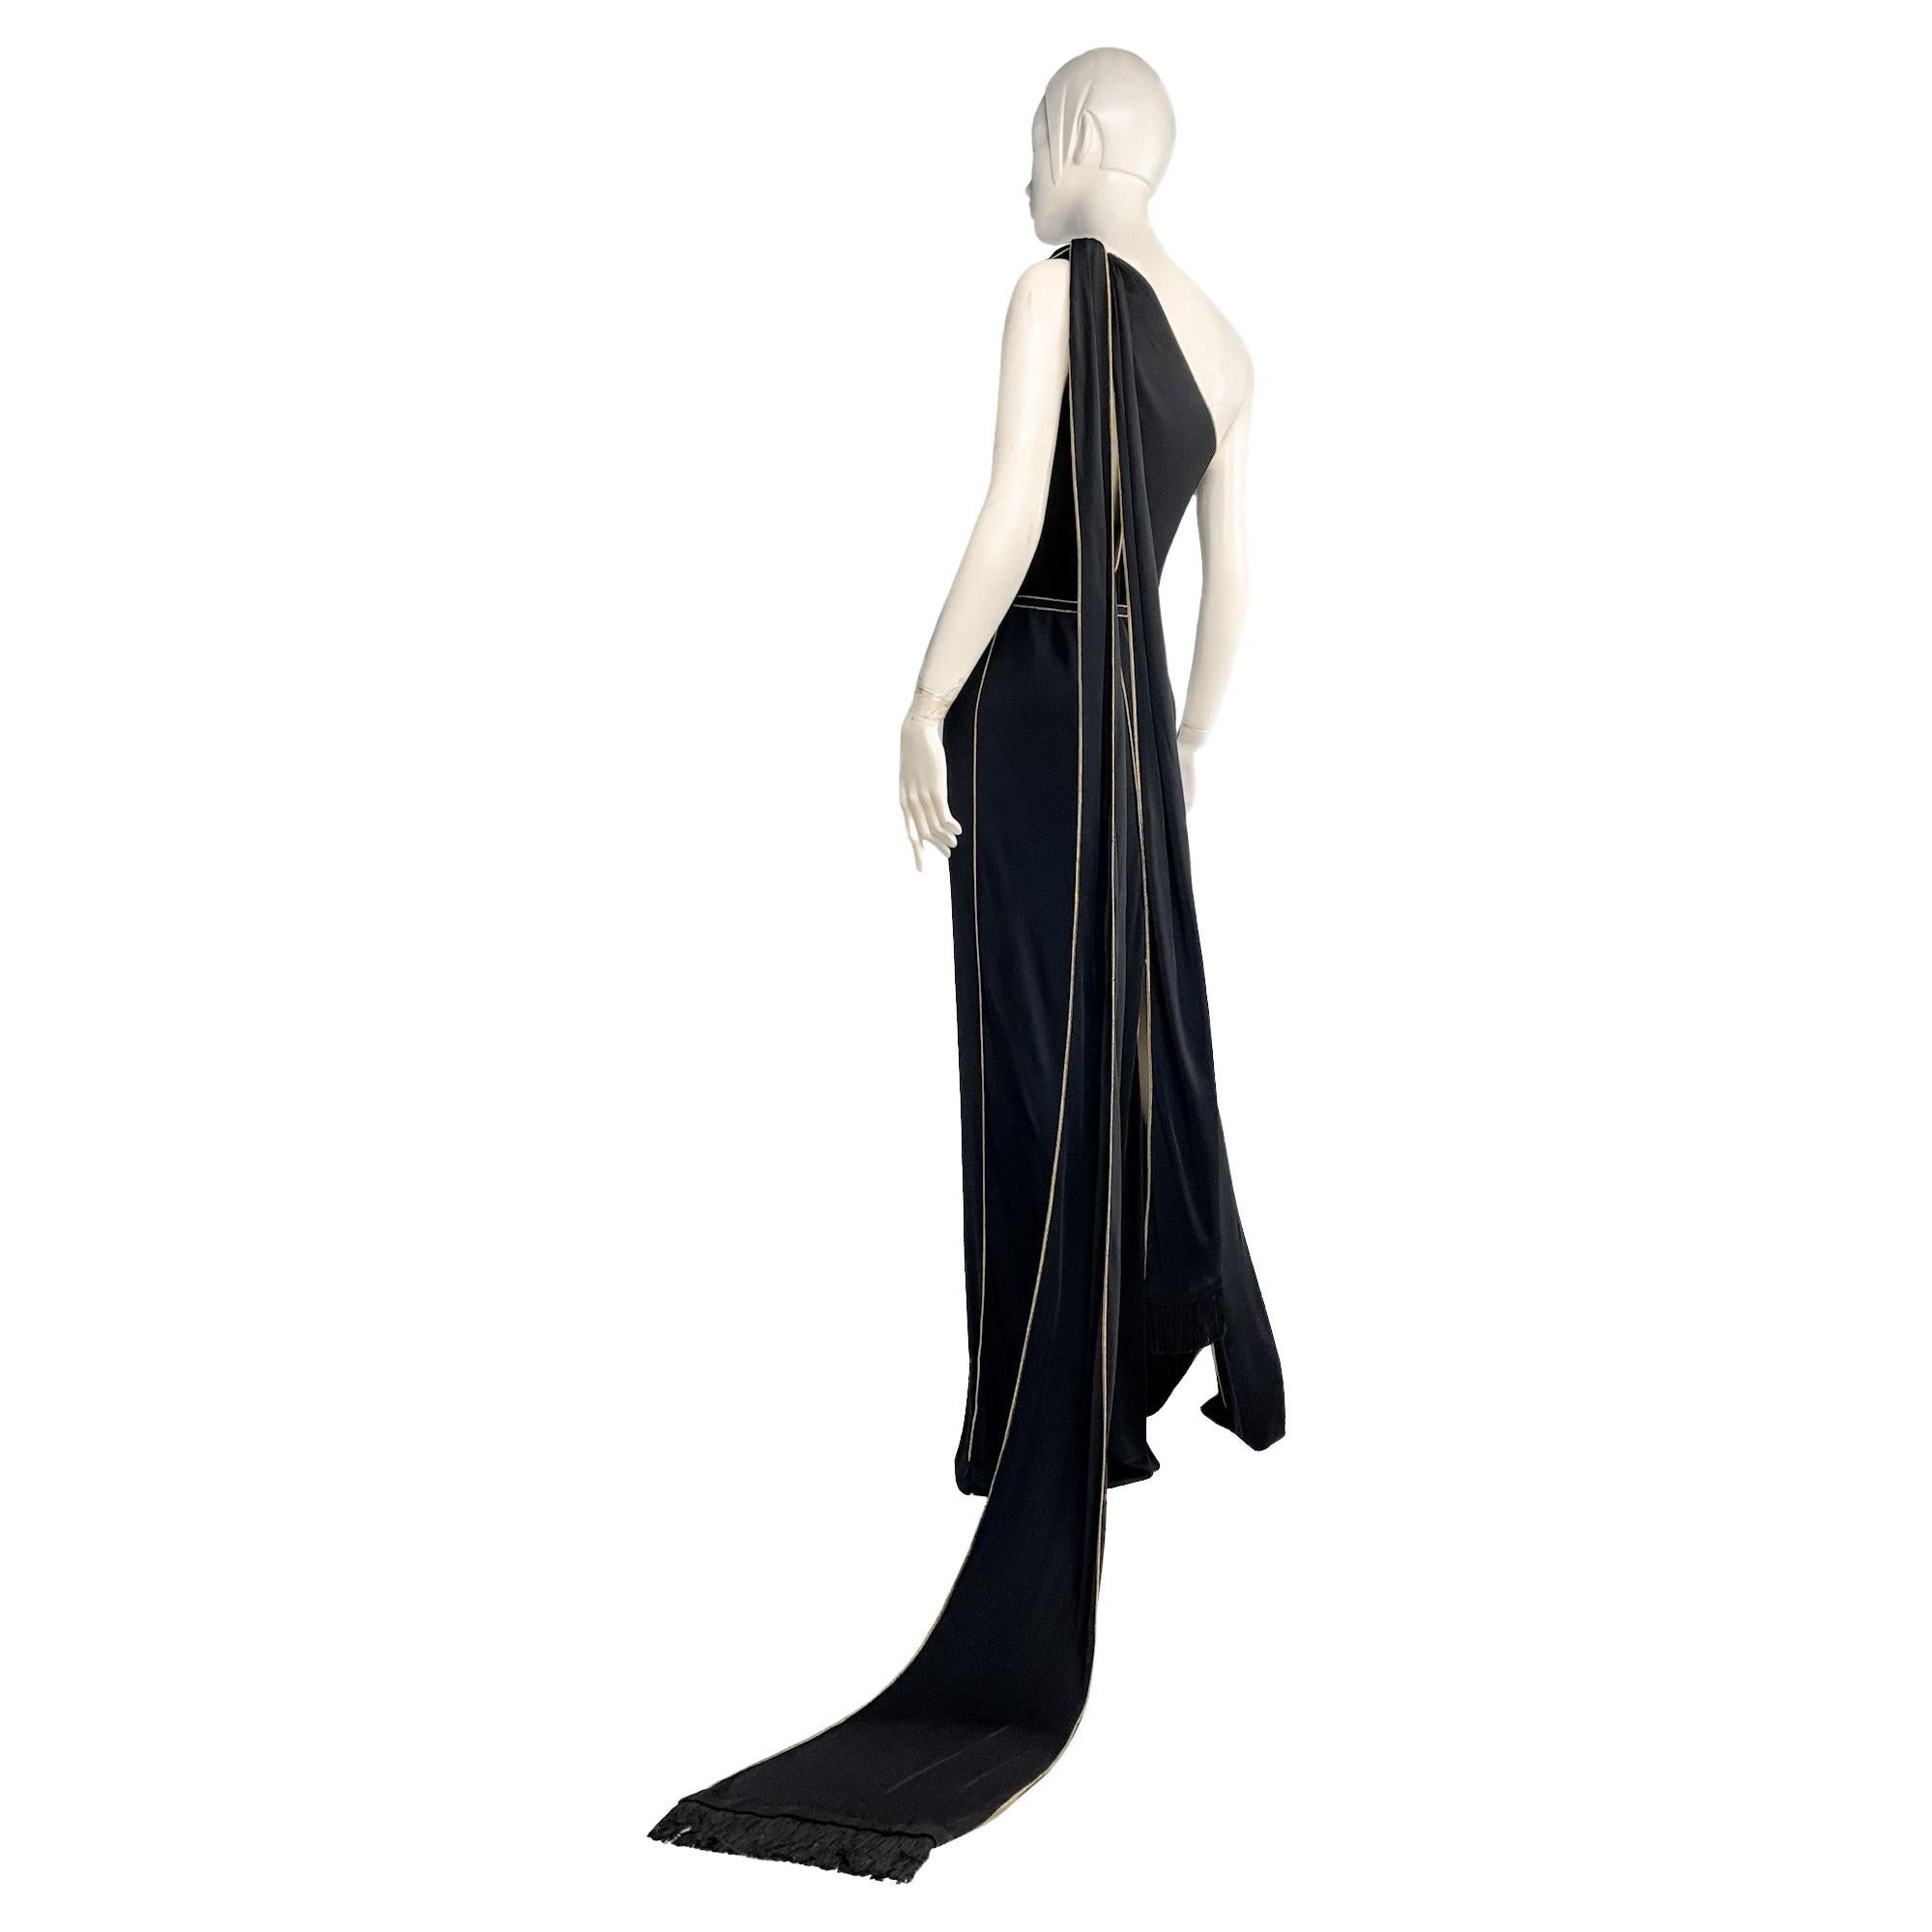 From 2006, this archival Gucci floor-length one-shoulder evening gown features asymmetric draped neckline, diagonal cutouts at front and back, and long fringed scarves/ties that we can style as a dress train, or tie in a bow, or wrap around